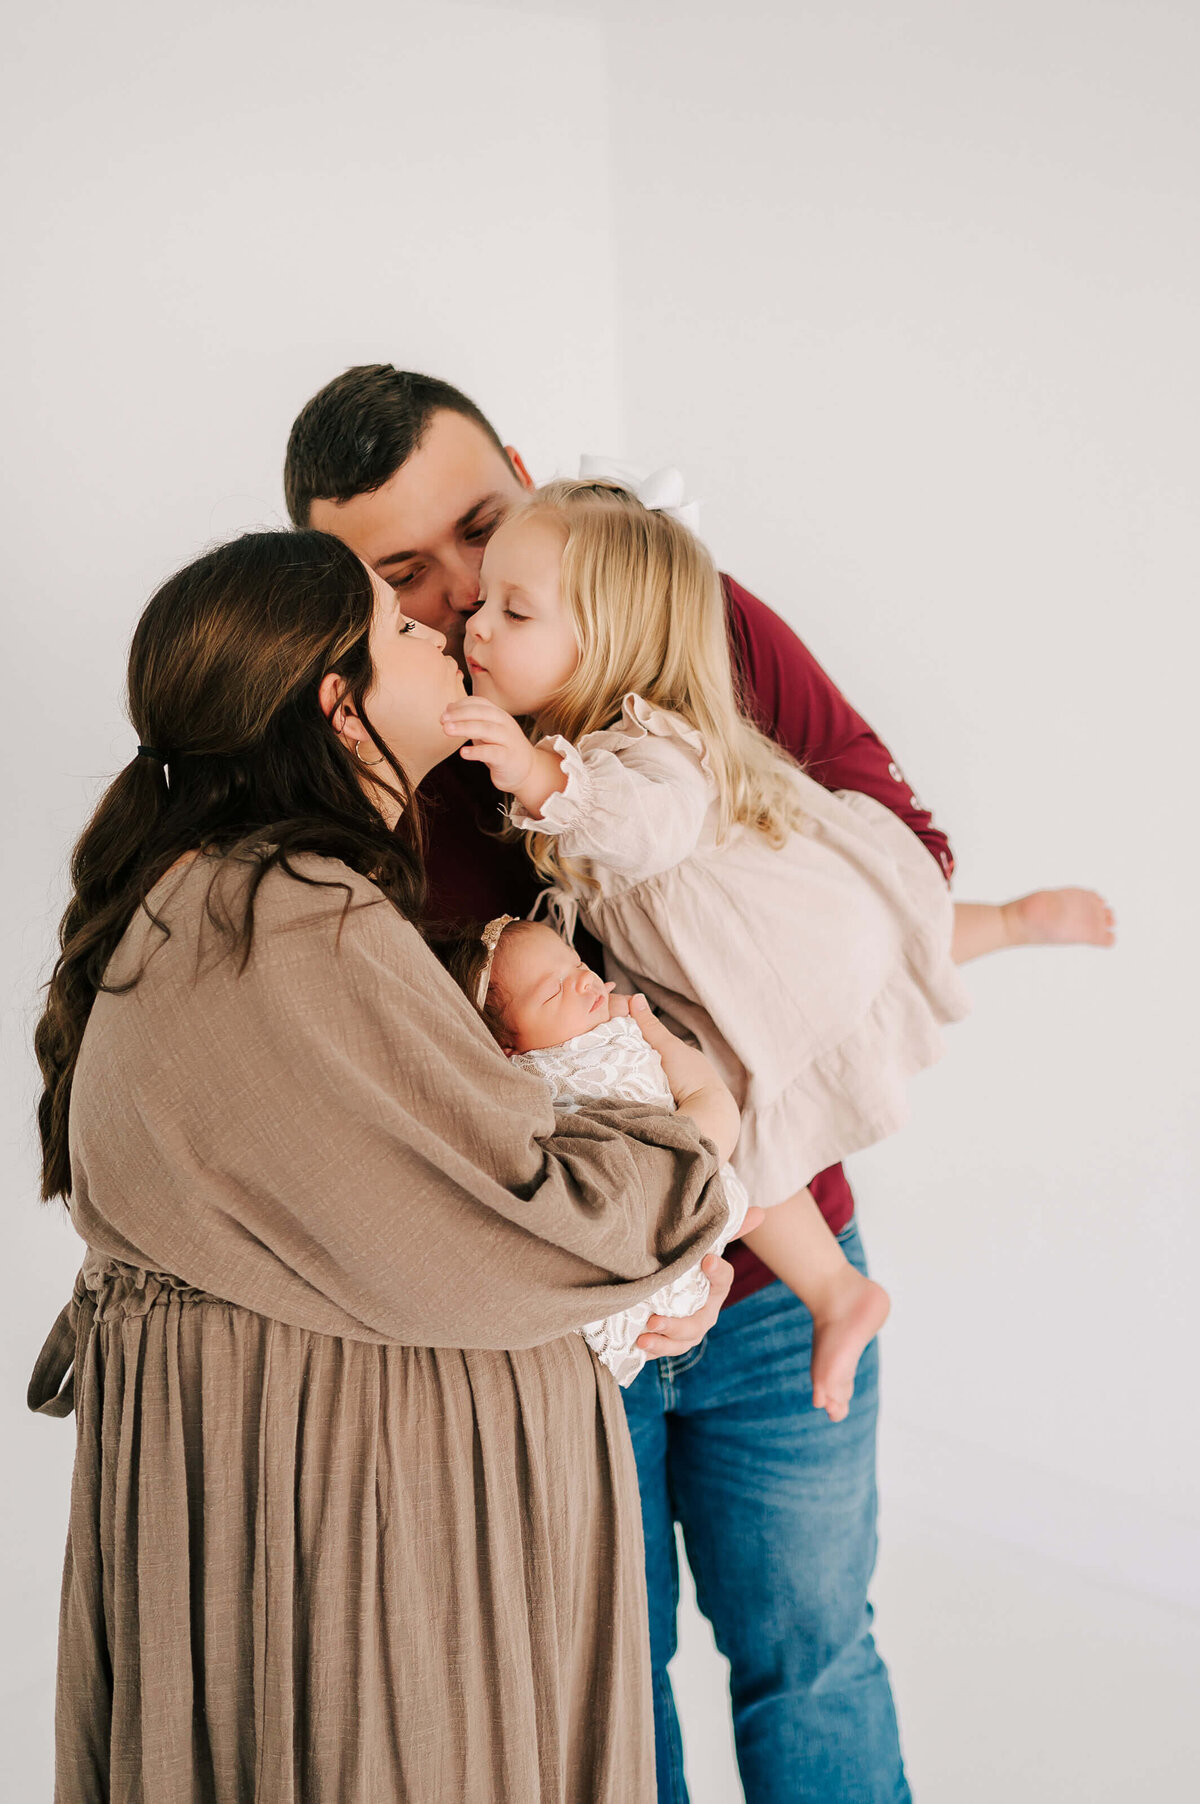 Springfield Mo newborn photographer Jessica Kennedy of The Xo Photography captures toddler kissing mom holding a newborn